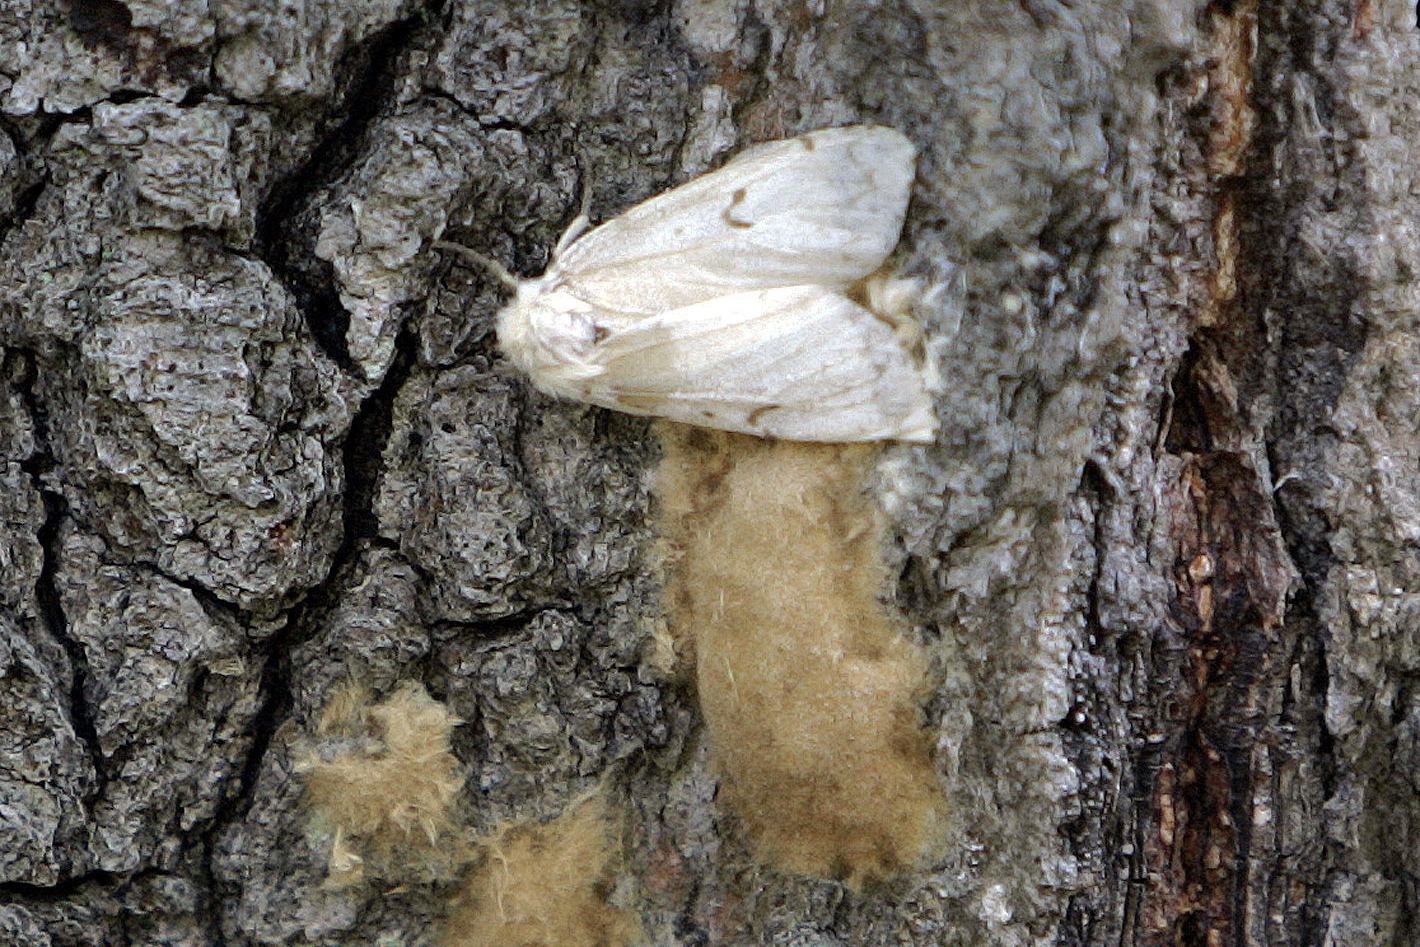 FILE - In this July 28, 2008, file photo, a female Lymantria dispar moth lays her eggs on the trunk of a tree in the Salmon River State Forest in Hebron, Conn. In July 2021, the Entomological Society of America announced it is dropping the common name of this destructive insect that is also an ethnic slur against a group of people: the gypsy moth. (AP Photo/Bob Child, File)